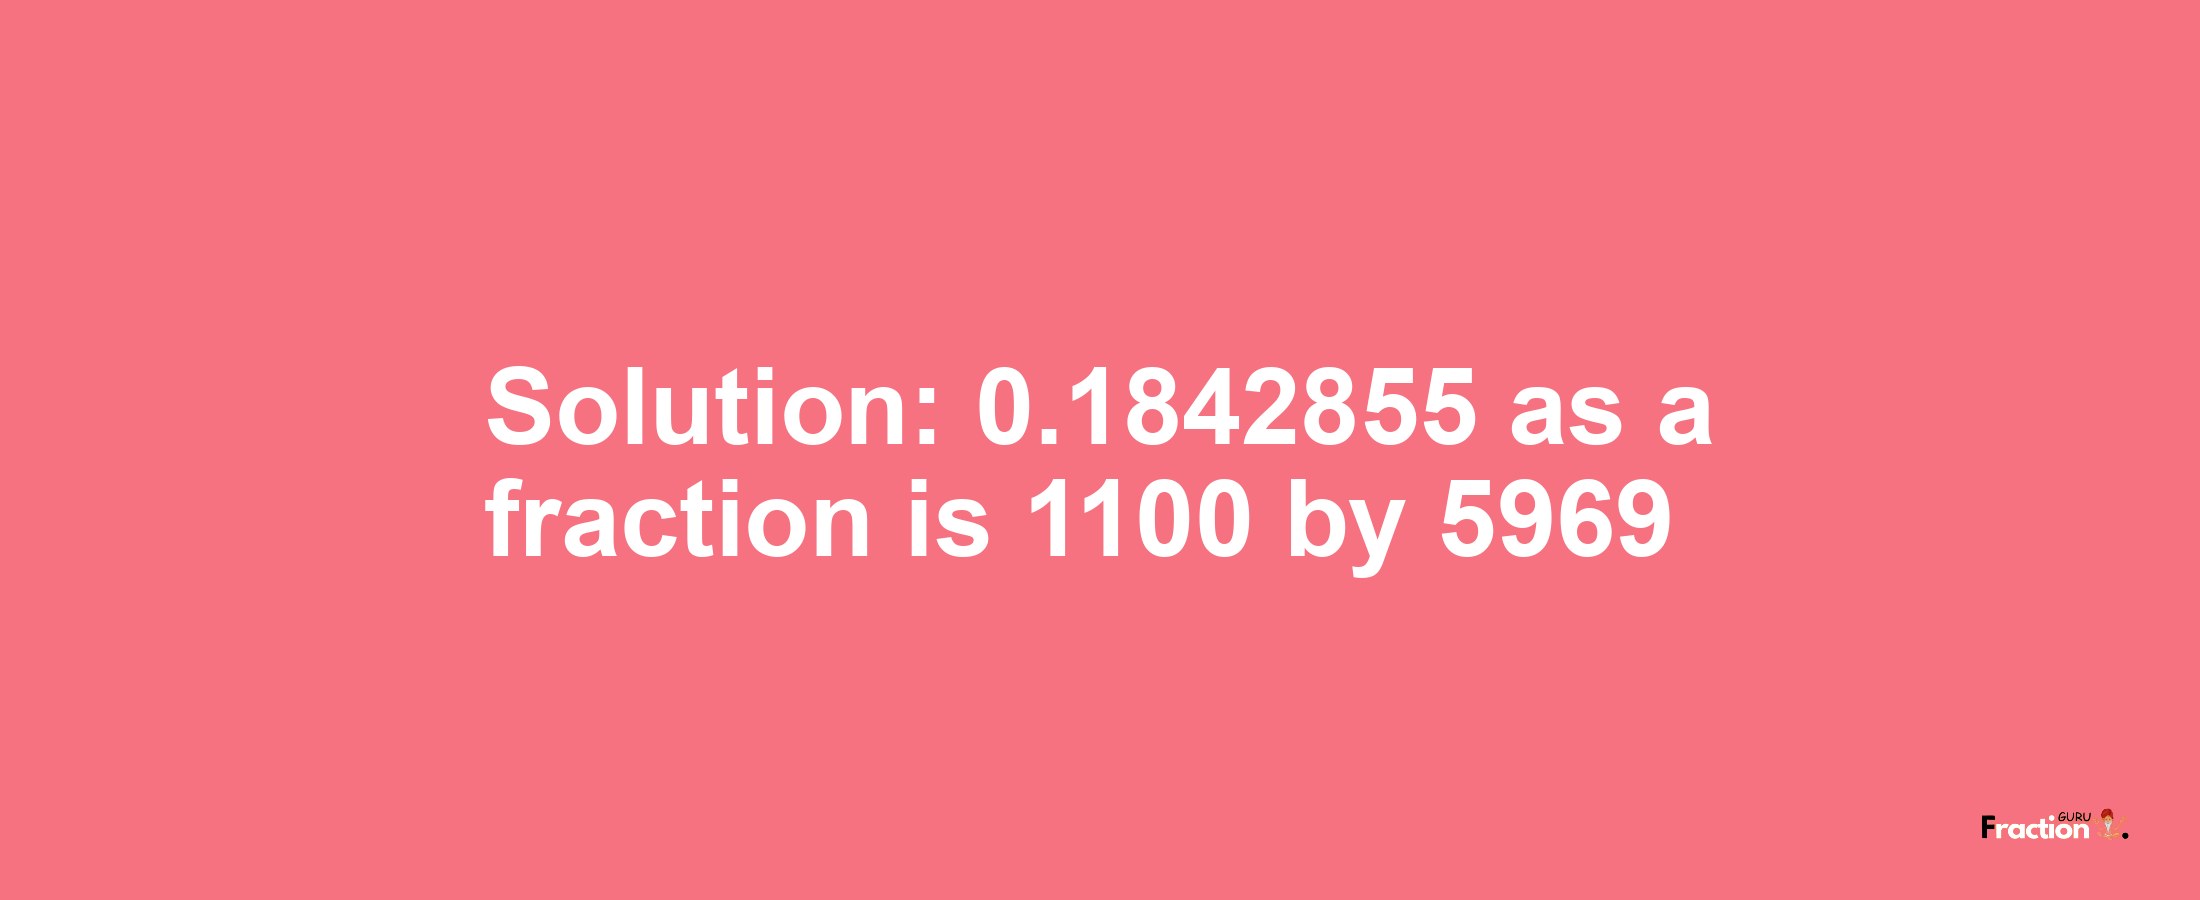 Solution:0.1842855 as a fraction is 1100/5969